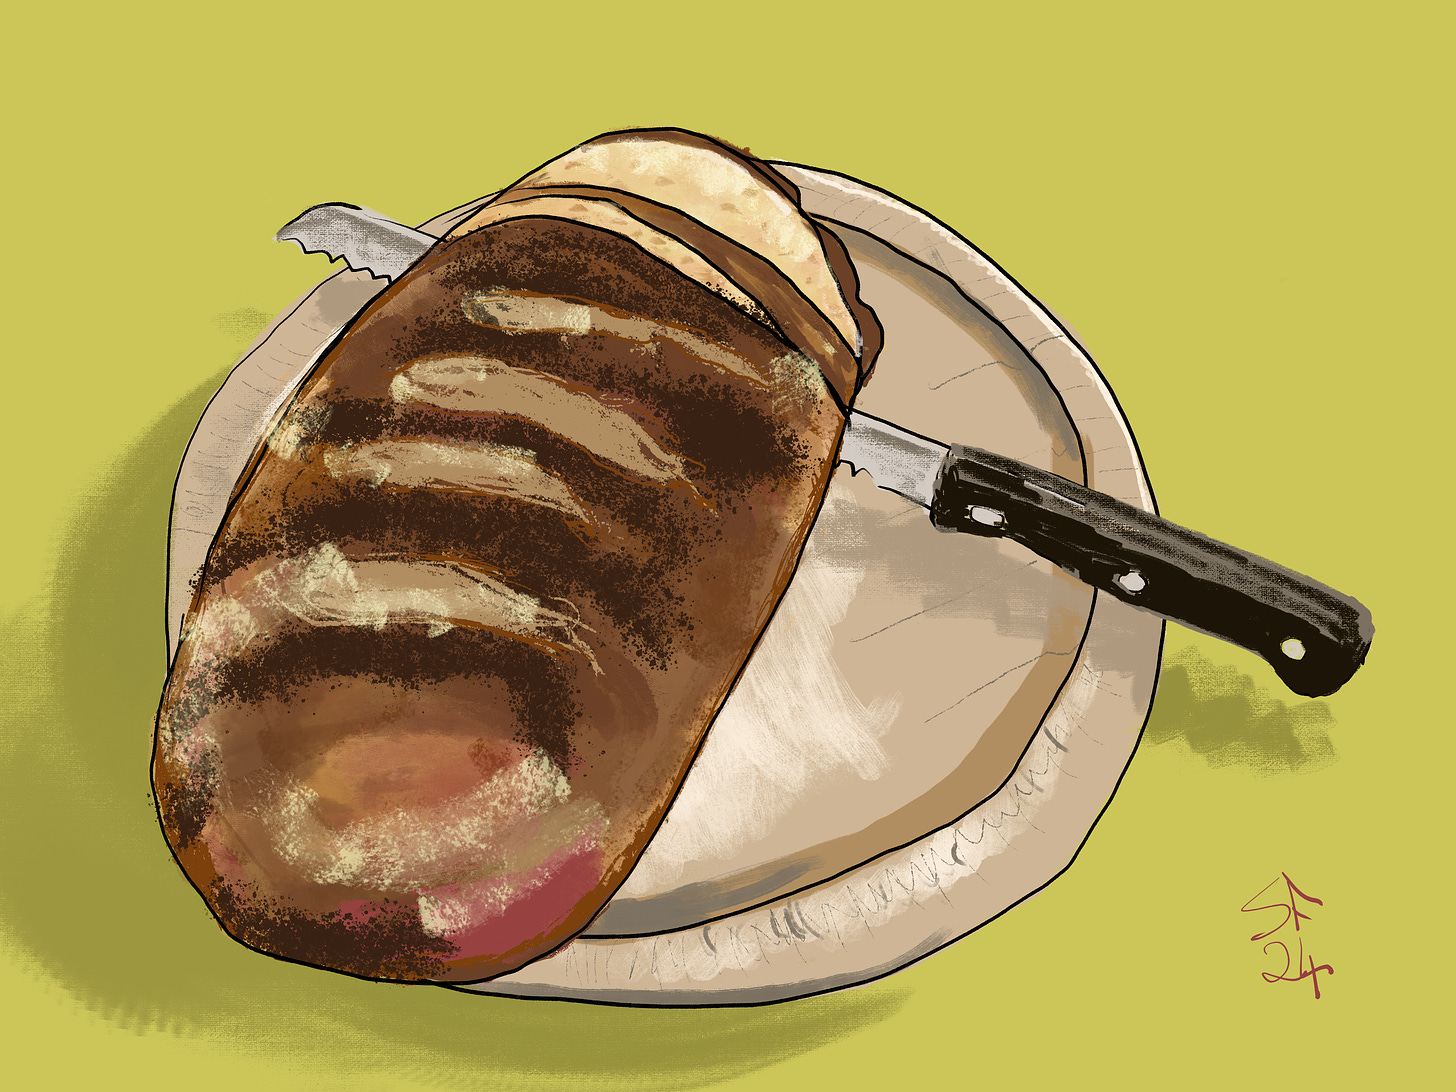 Cartoon: loaf of bread with a bread knife cutting into it, on round bread board.